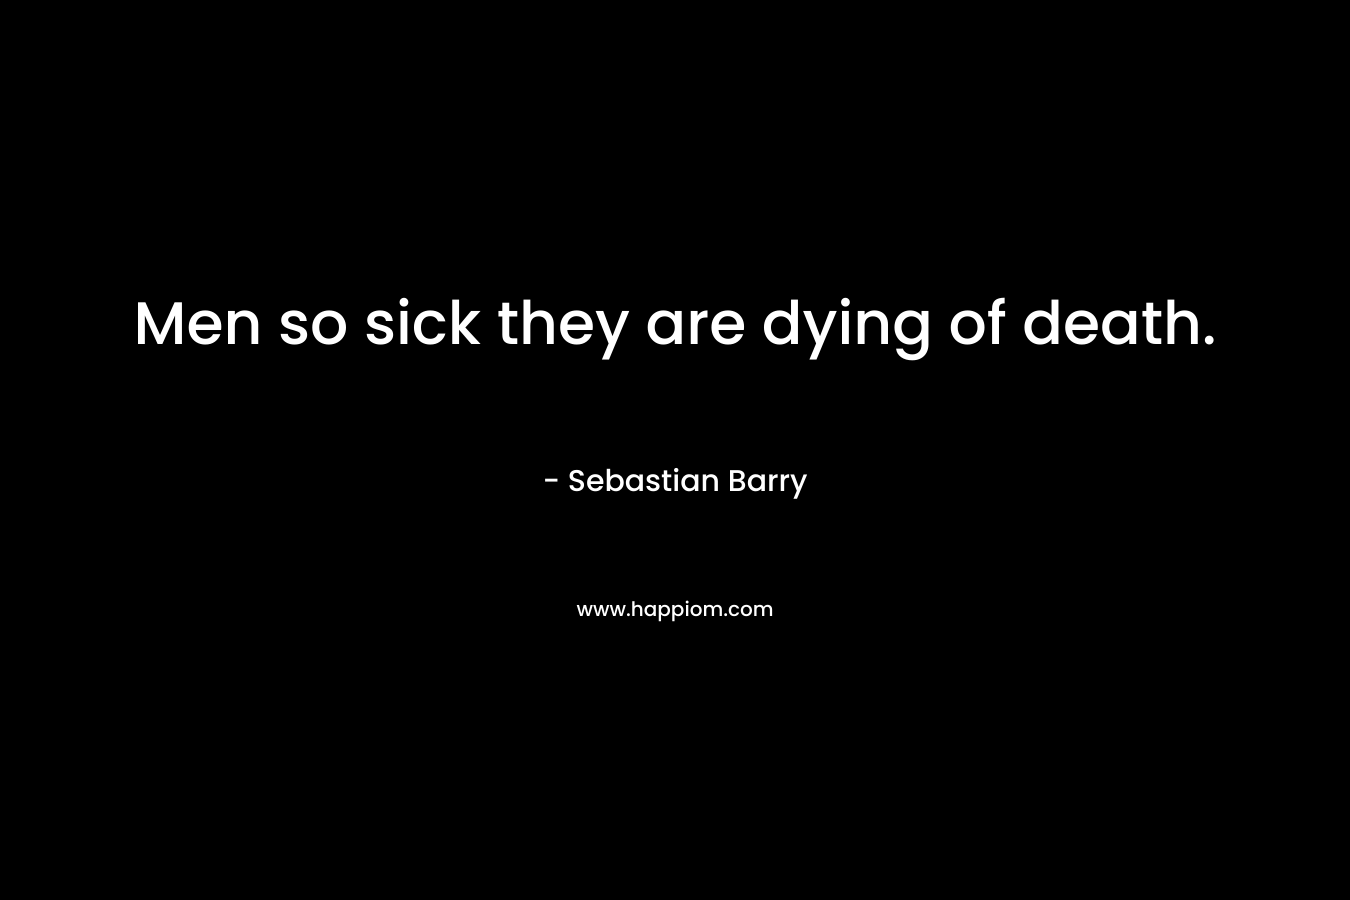 Men so sick they are dying of death. – Sebastian Barry